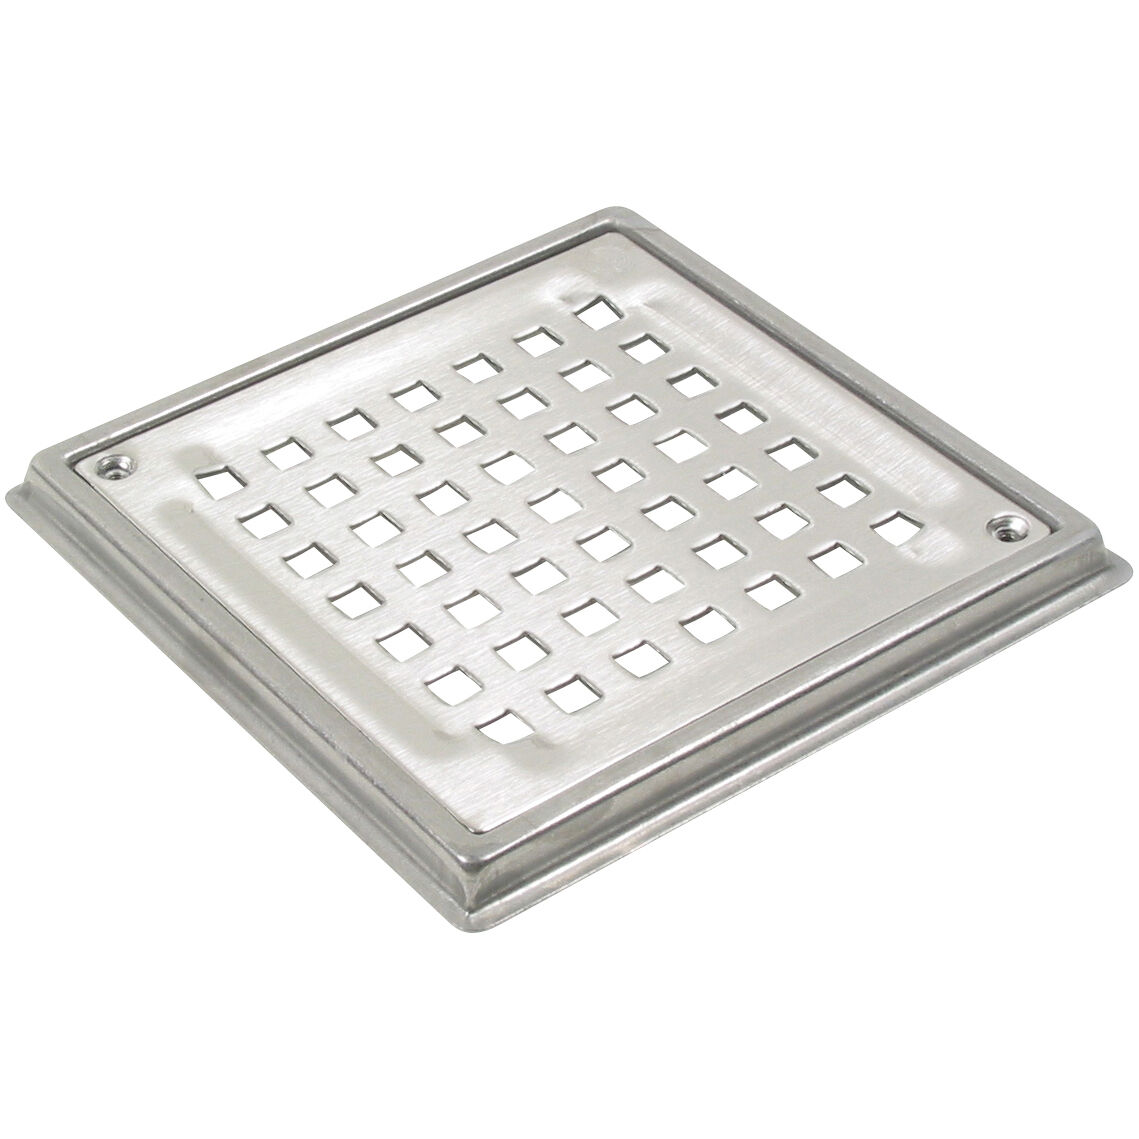 Product Image - Grating-82. For Cabin drain